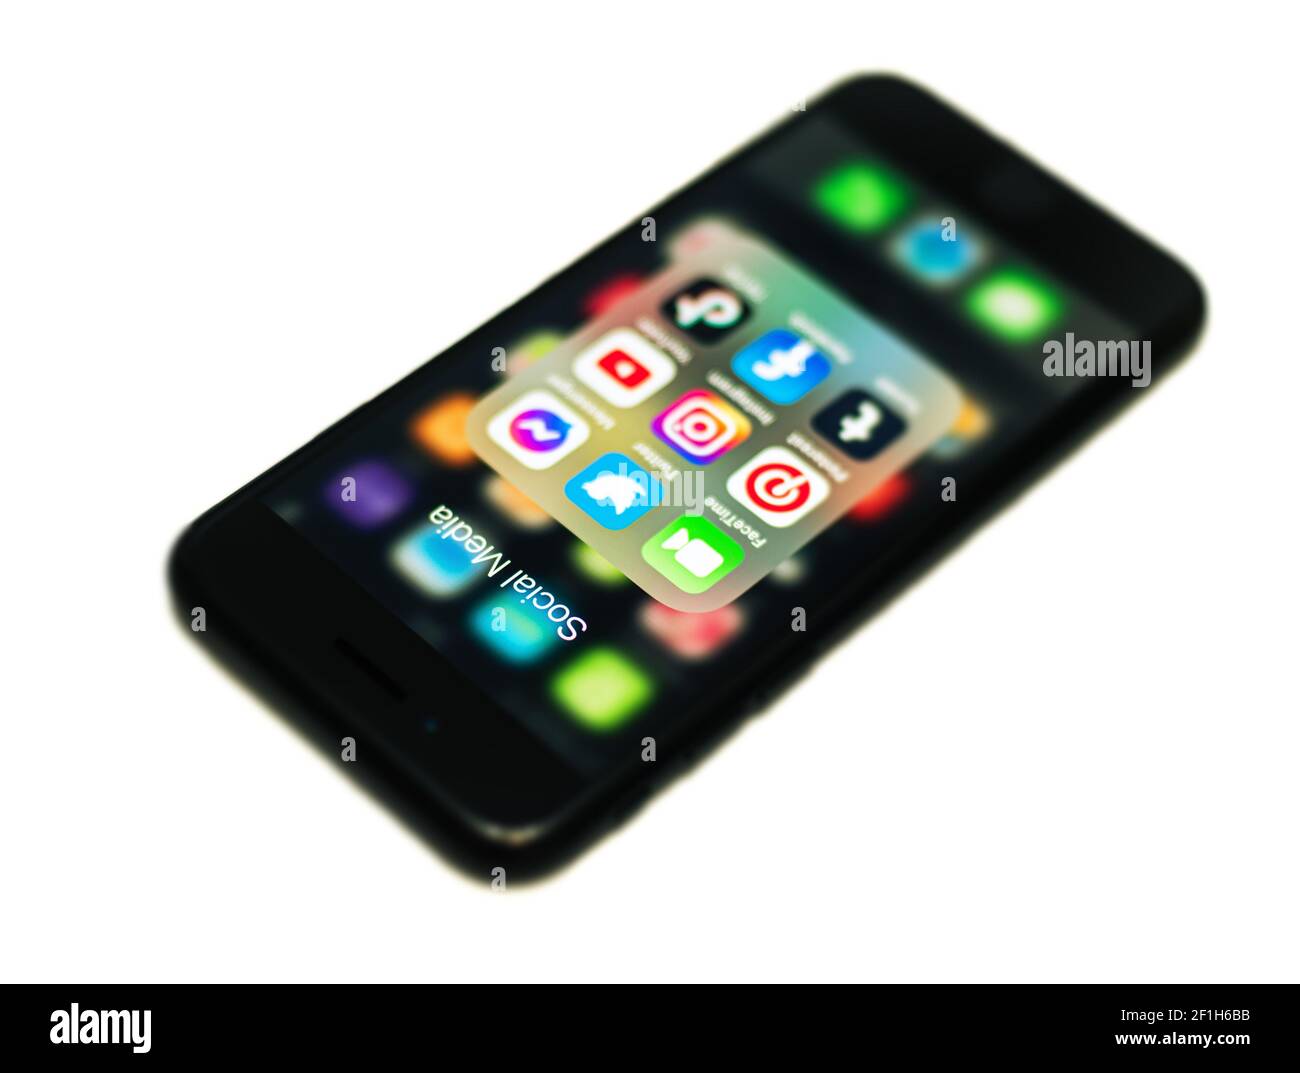 2020: Apple  iPhone 7 black smartphone showing the Social Media icons bundle, lies on white Stock Photo